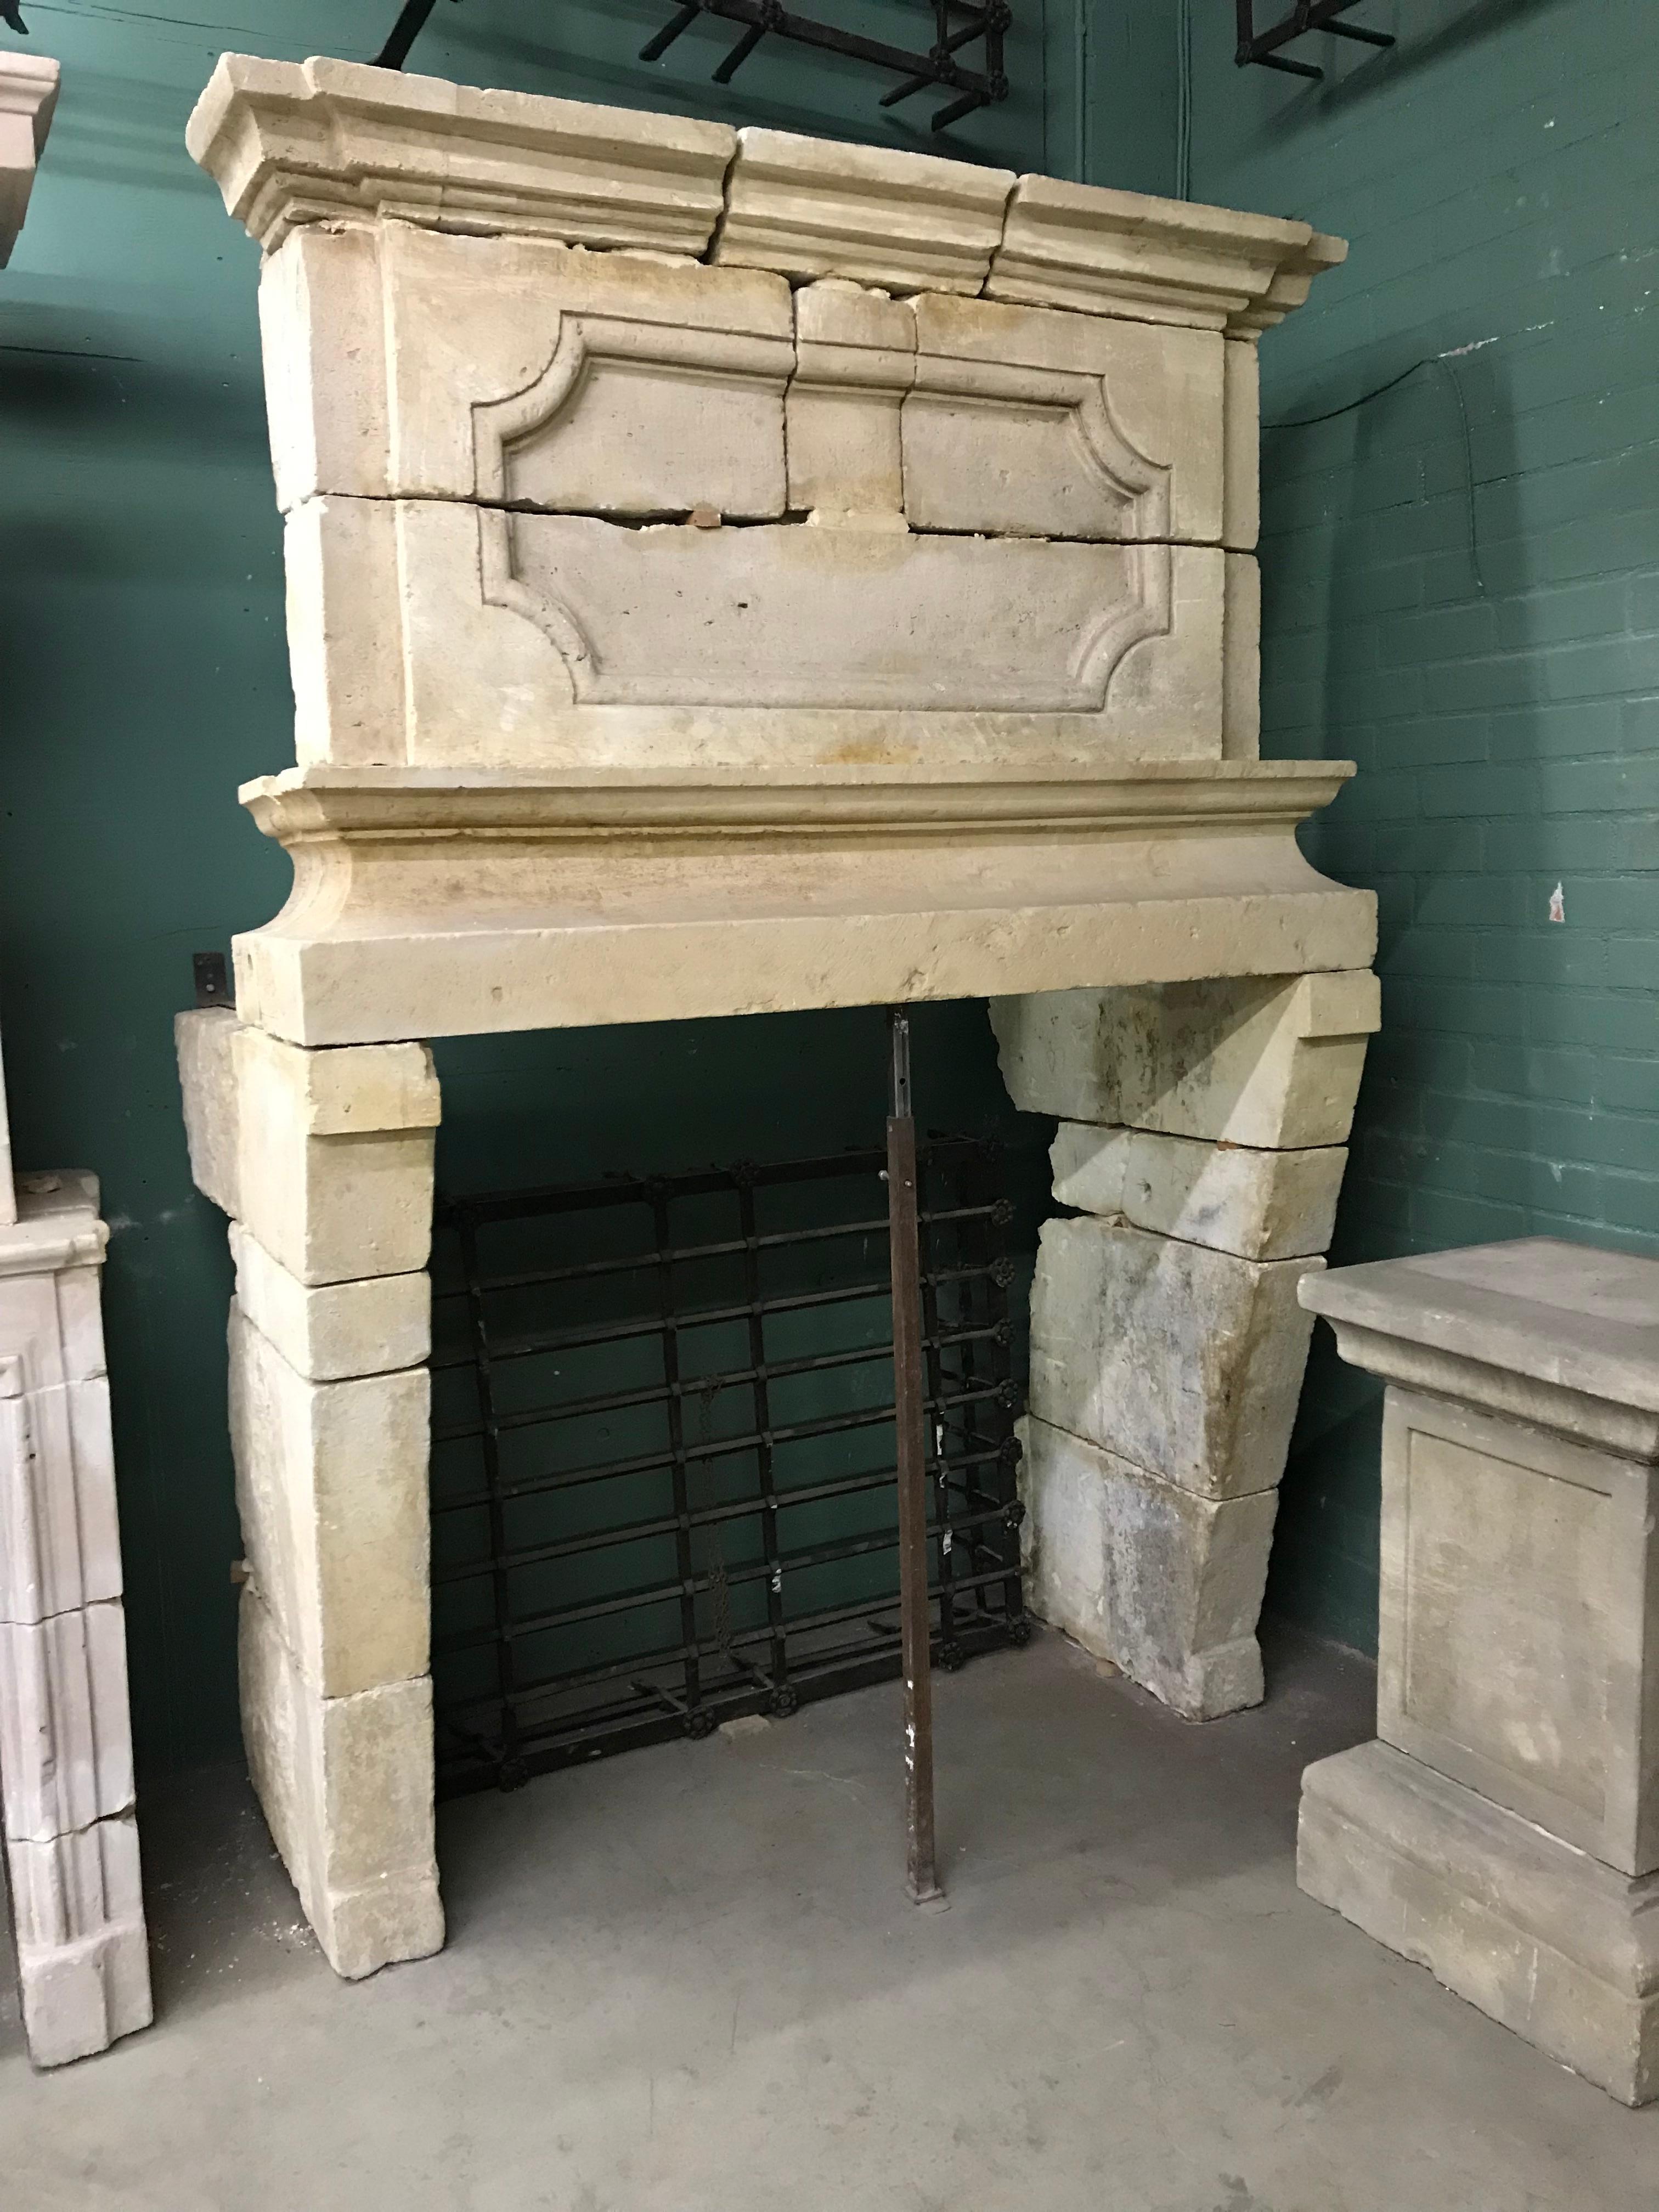  Extremely Rare 17th Century Louis XIII Chateau Fireplace, 1610-1643
 Rare and unique French antique castle fireplace Louis XIII period Limestone Chimney with a magnificent Trumeau Top . 

Dimensions of fireplace With Trumeau top dimensions Height